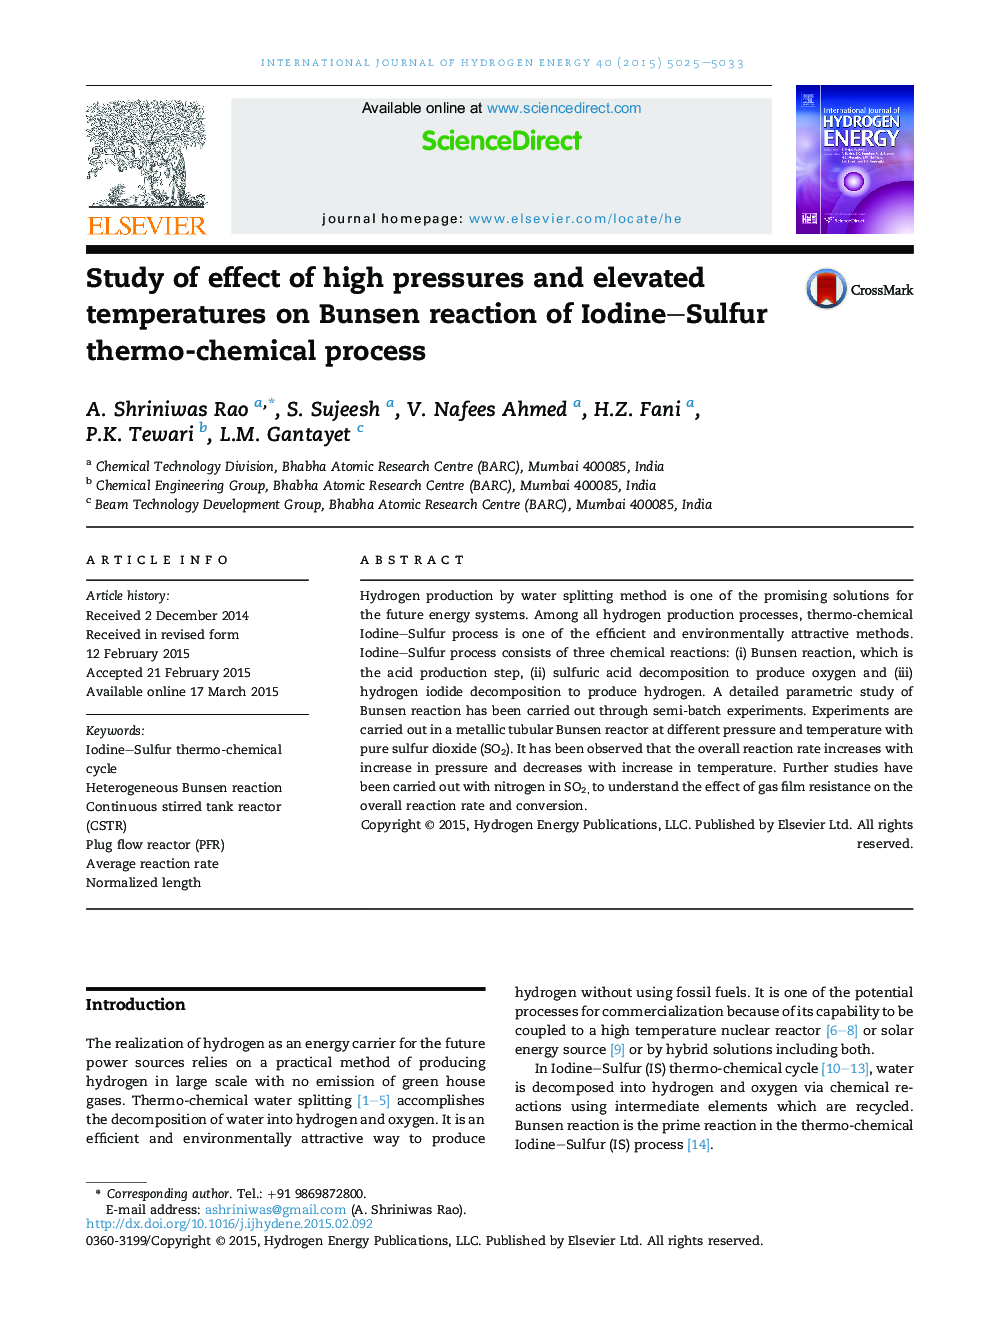 Study of effect of high pressures and elevated temperatures on Bunsen reaction of Iodine-Sulfur thermo-chemical process